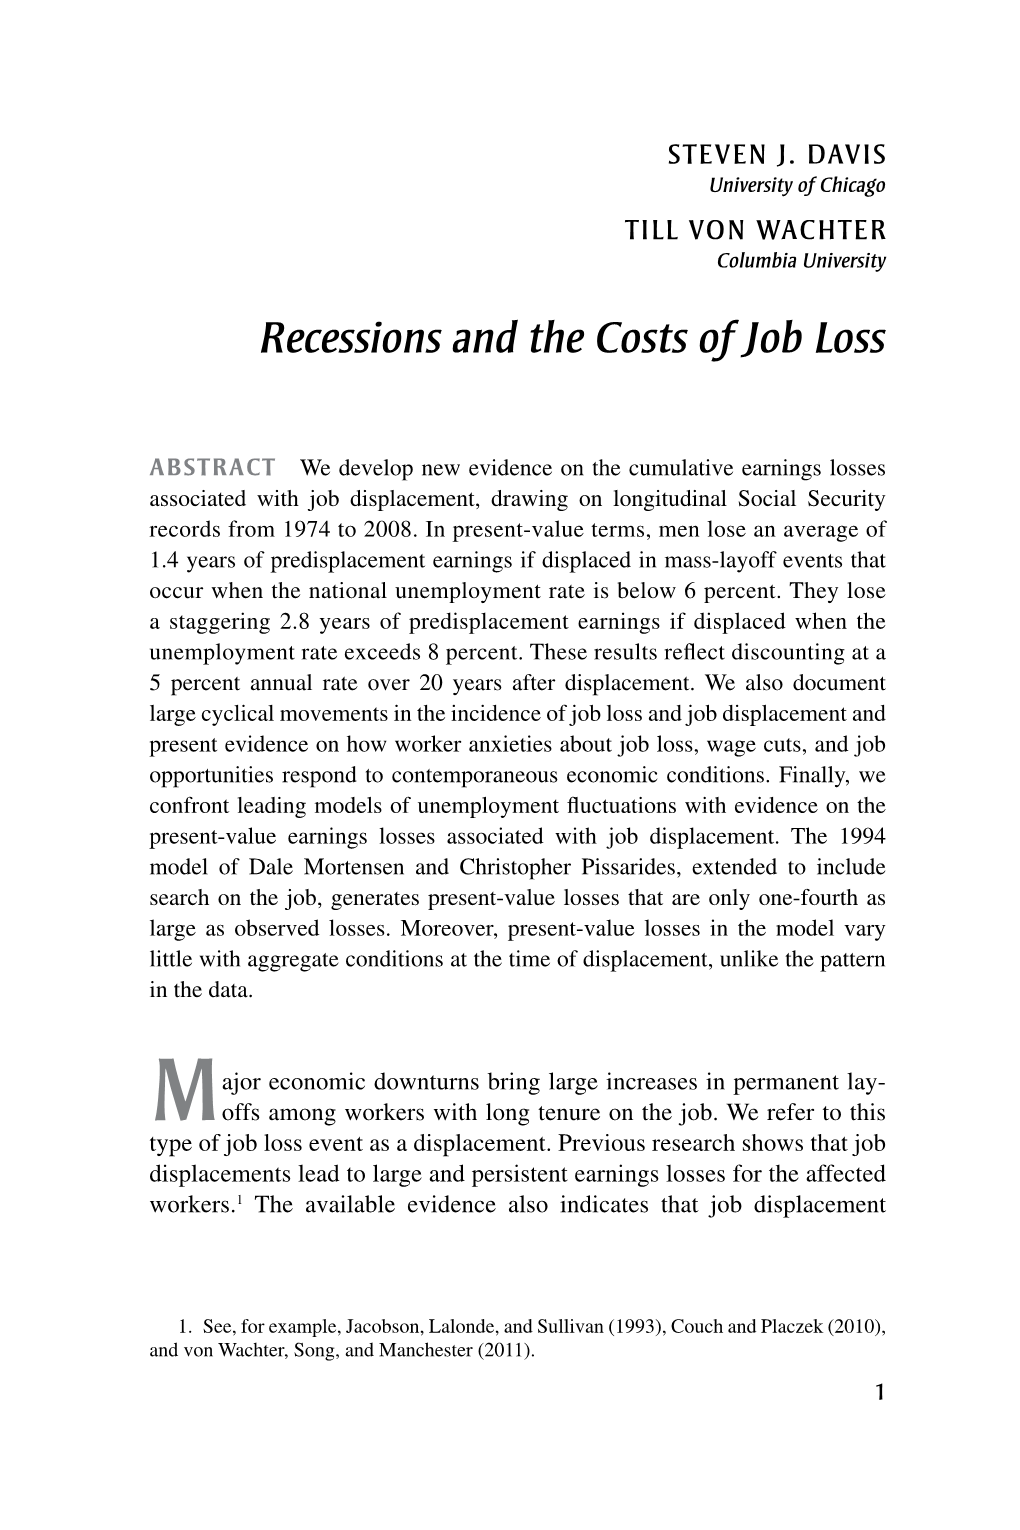 Recessions and the Costs of Job Loss